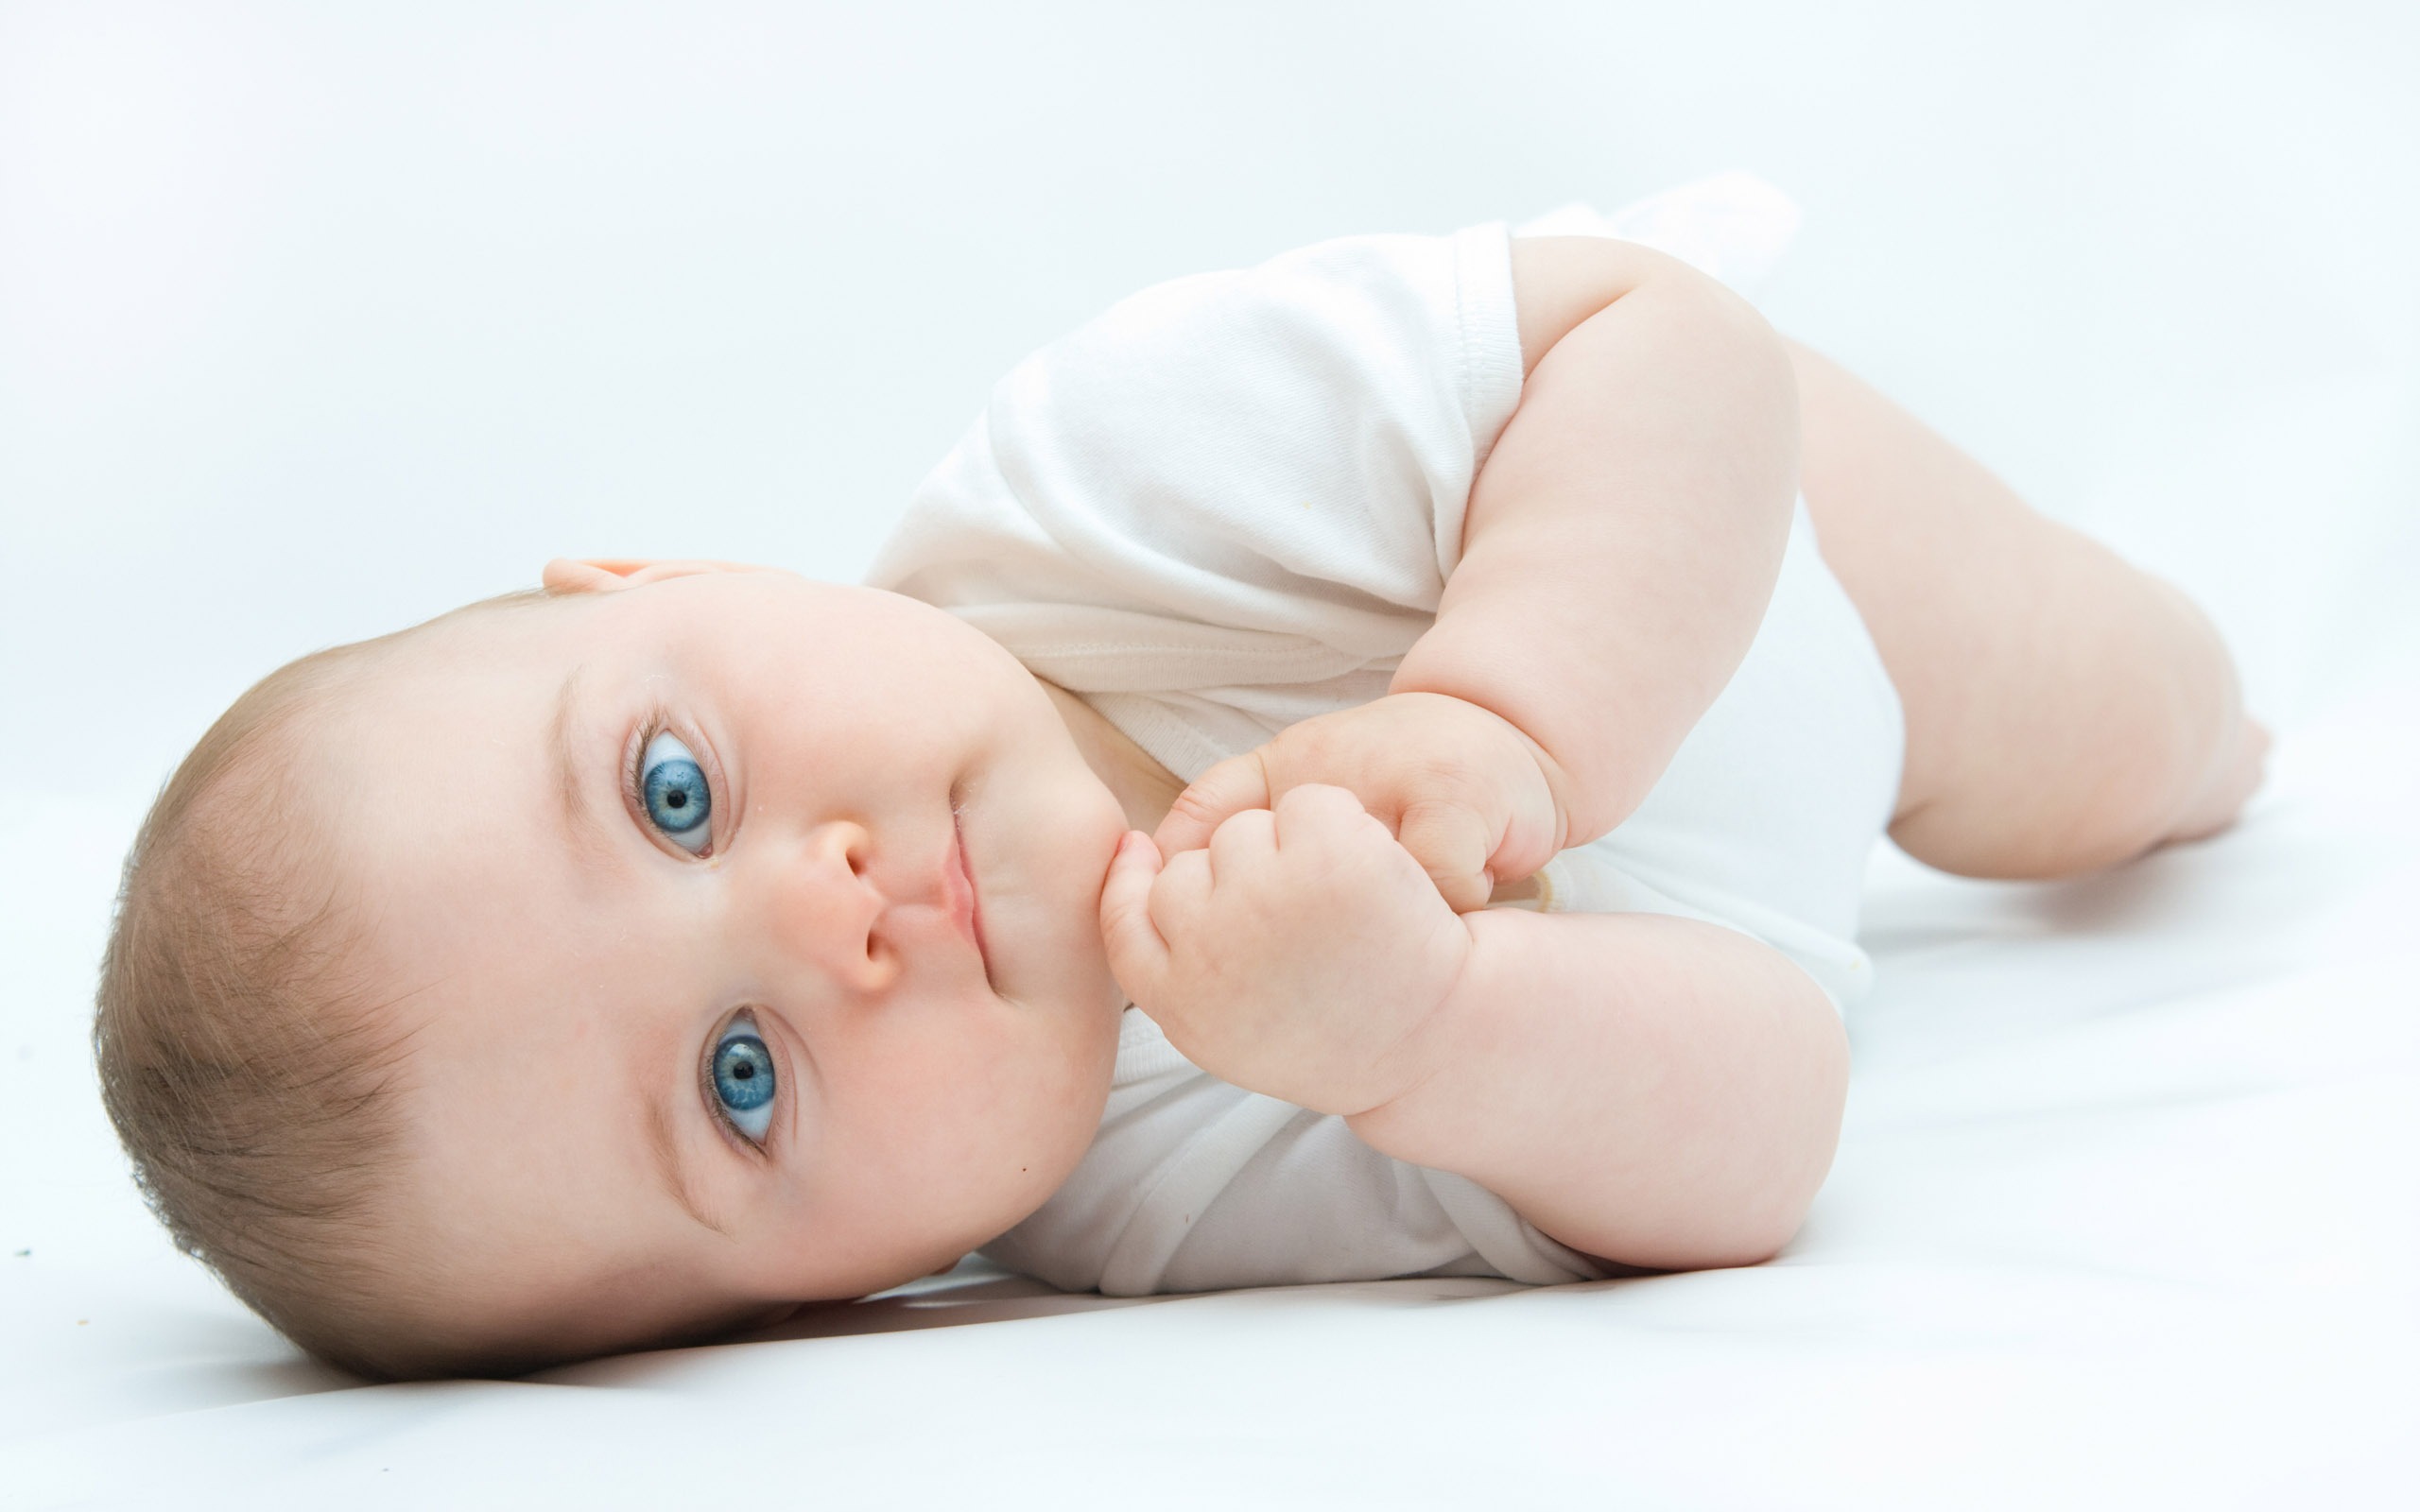 Cute Baby Wallpapers (6) #19 - 2560x1600